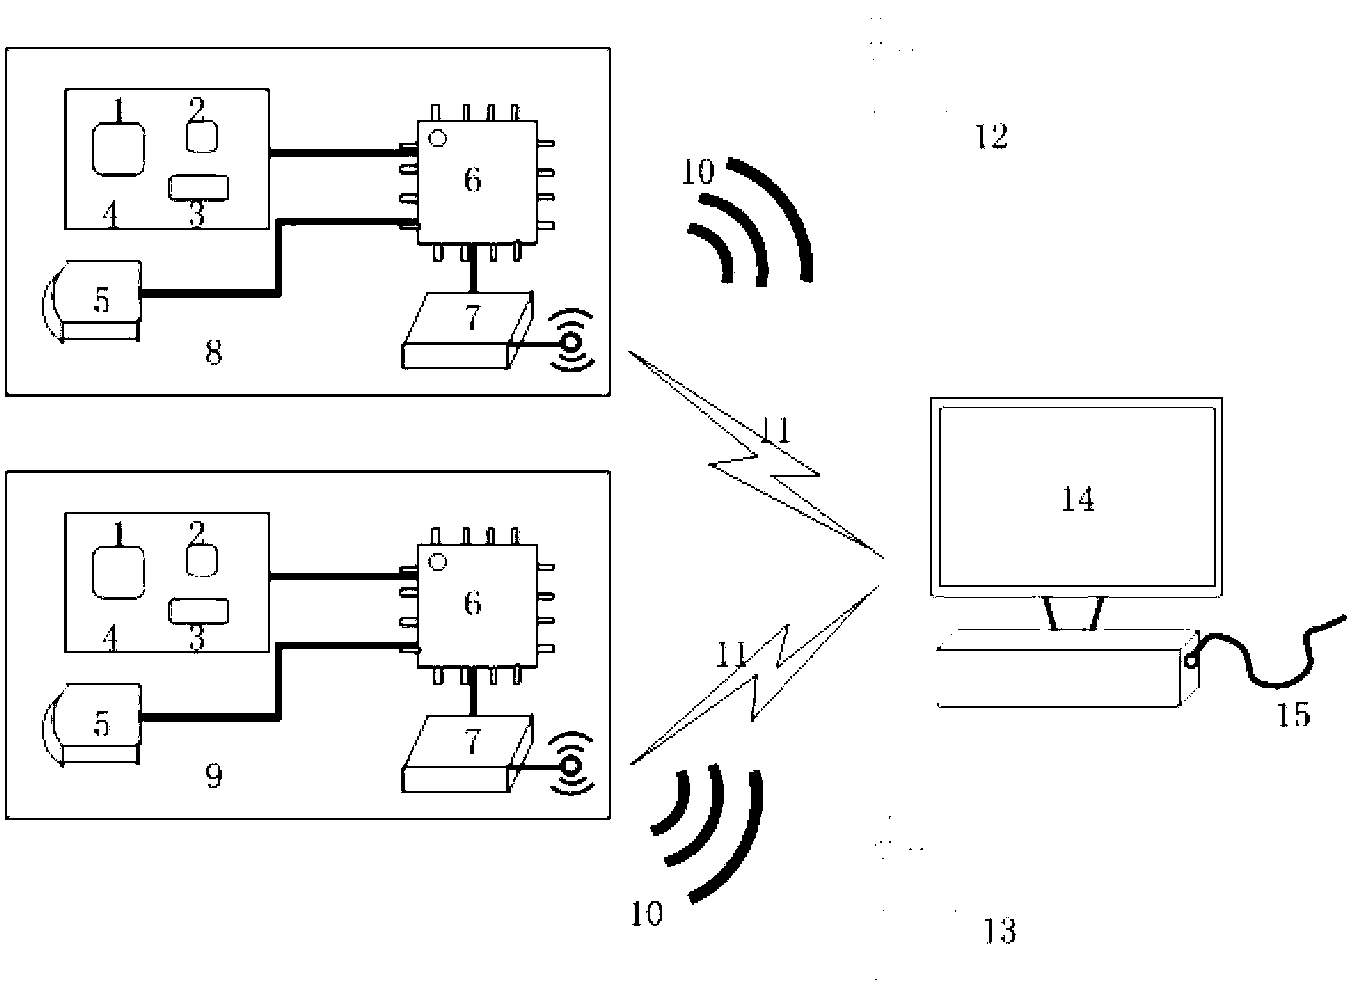 Tumble detecting and positioning system and method